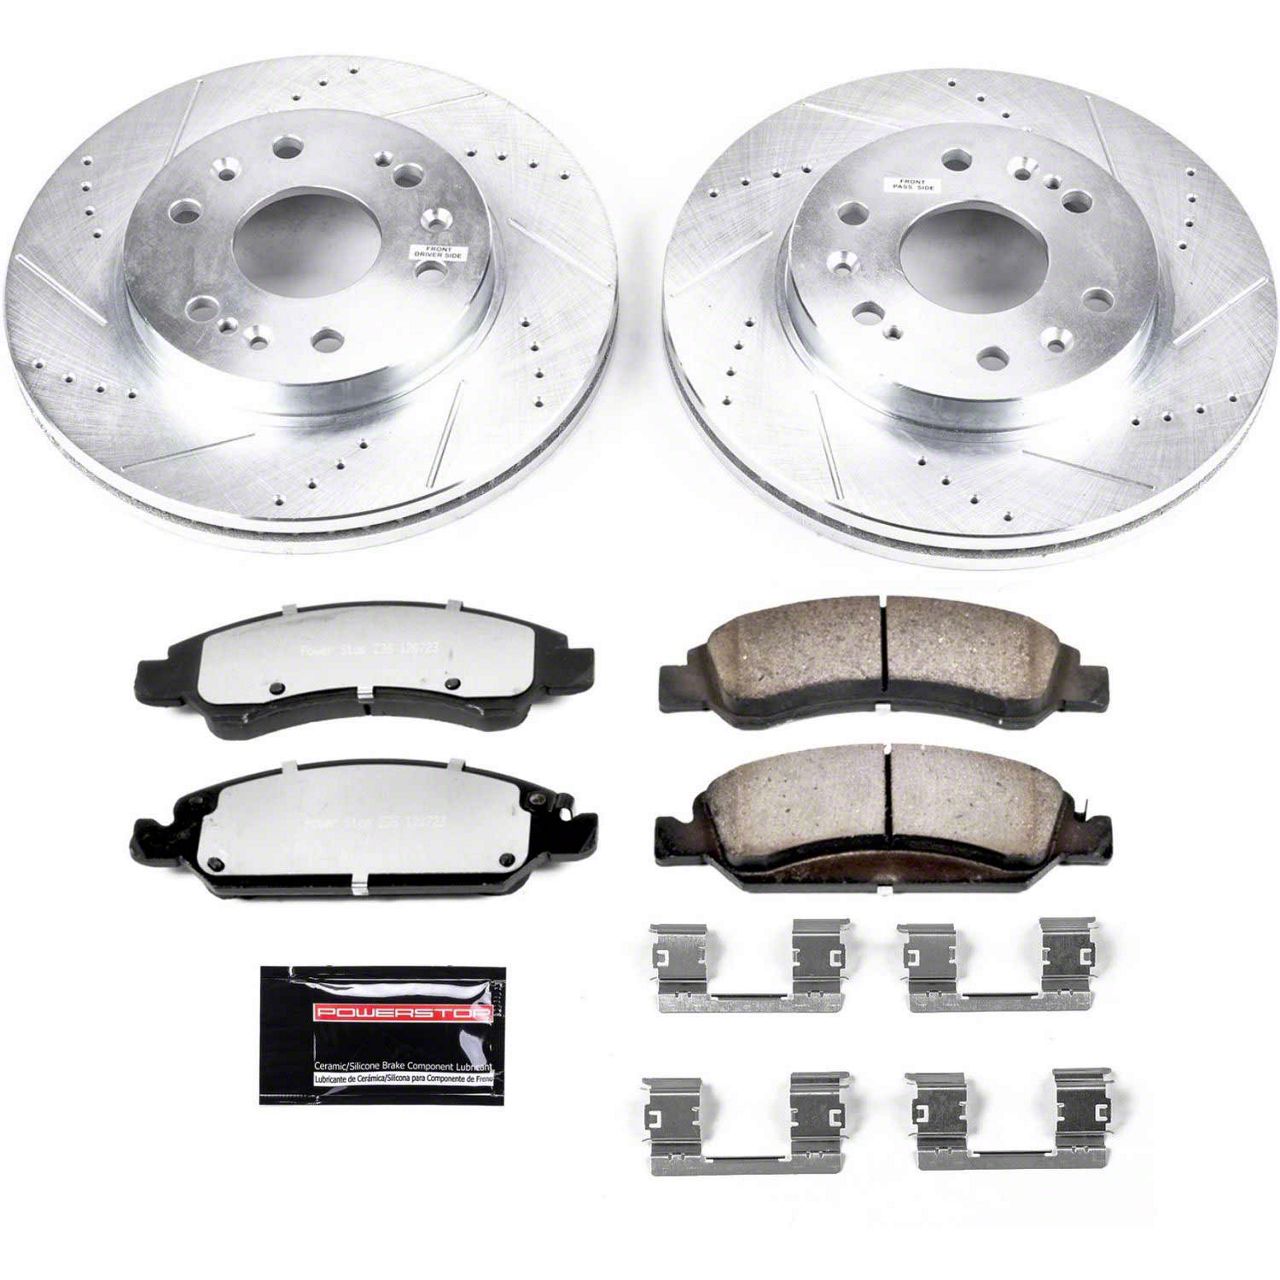 Details about  / For Chevy Silverado 3500 HD 07-10 Brake Pads Power Stop Z36 Extreme Truck /& Tow